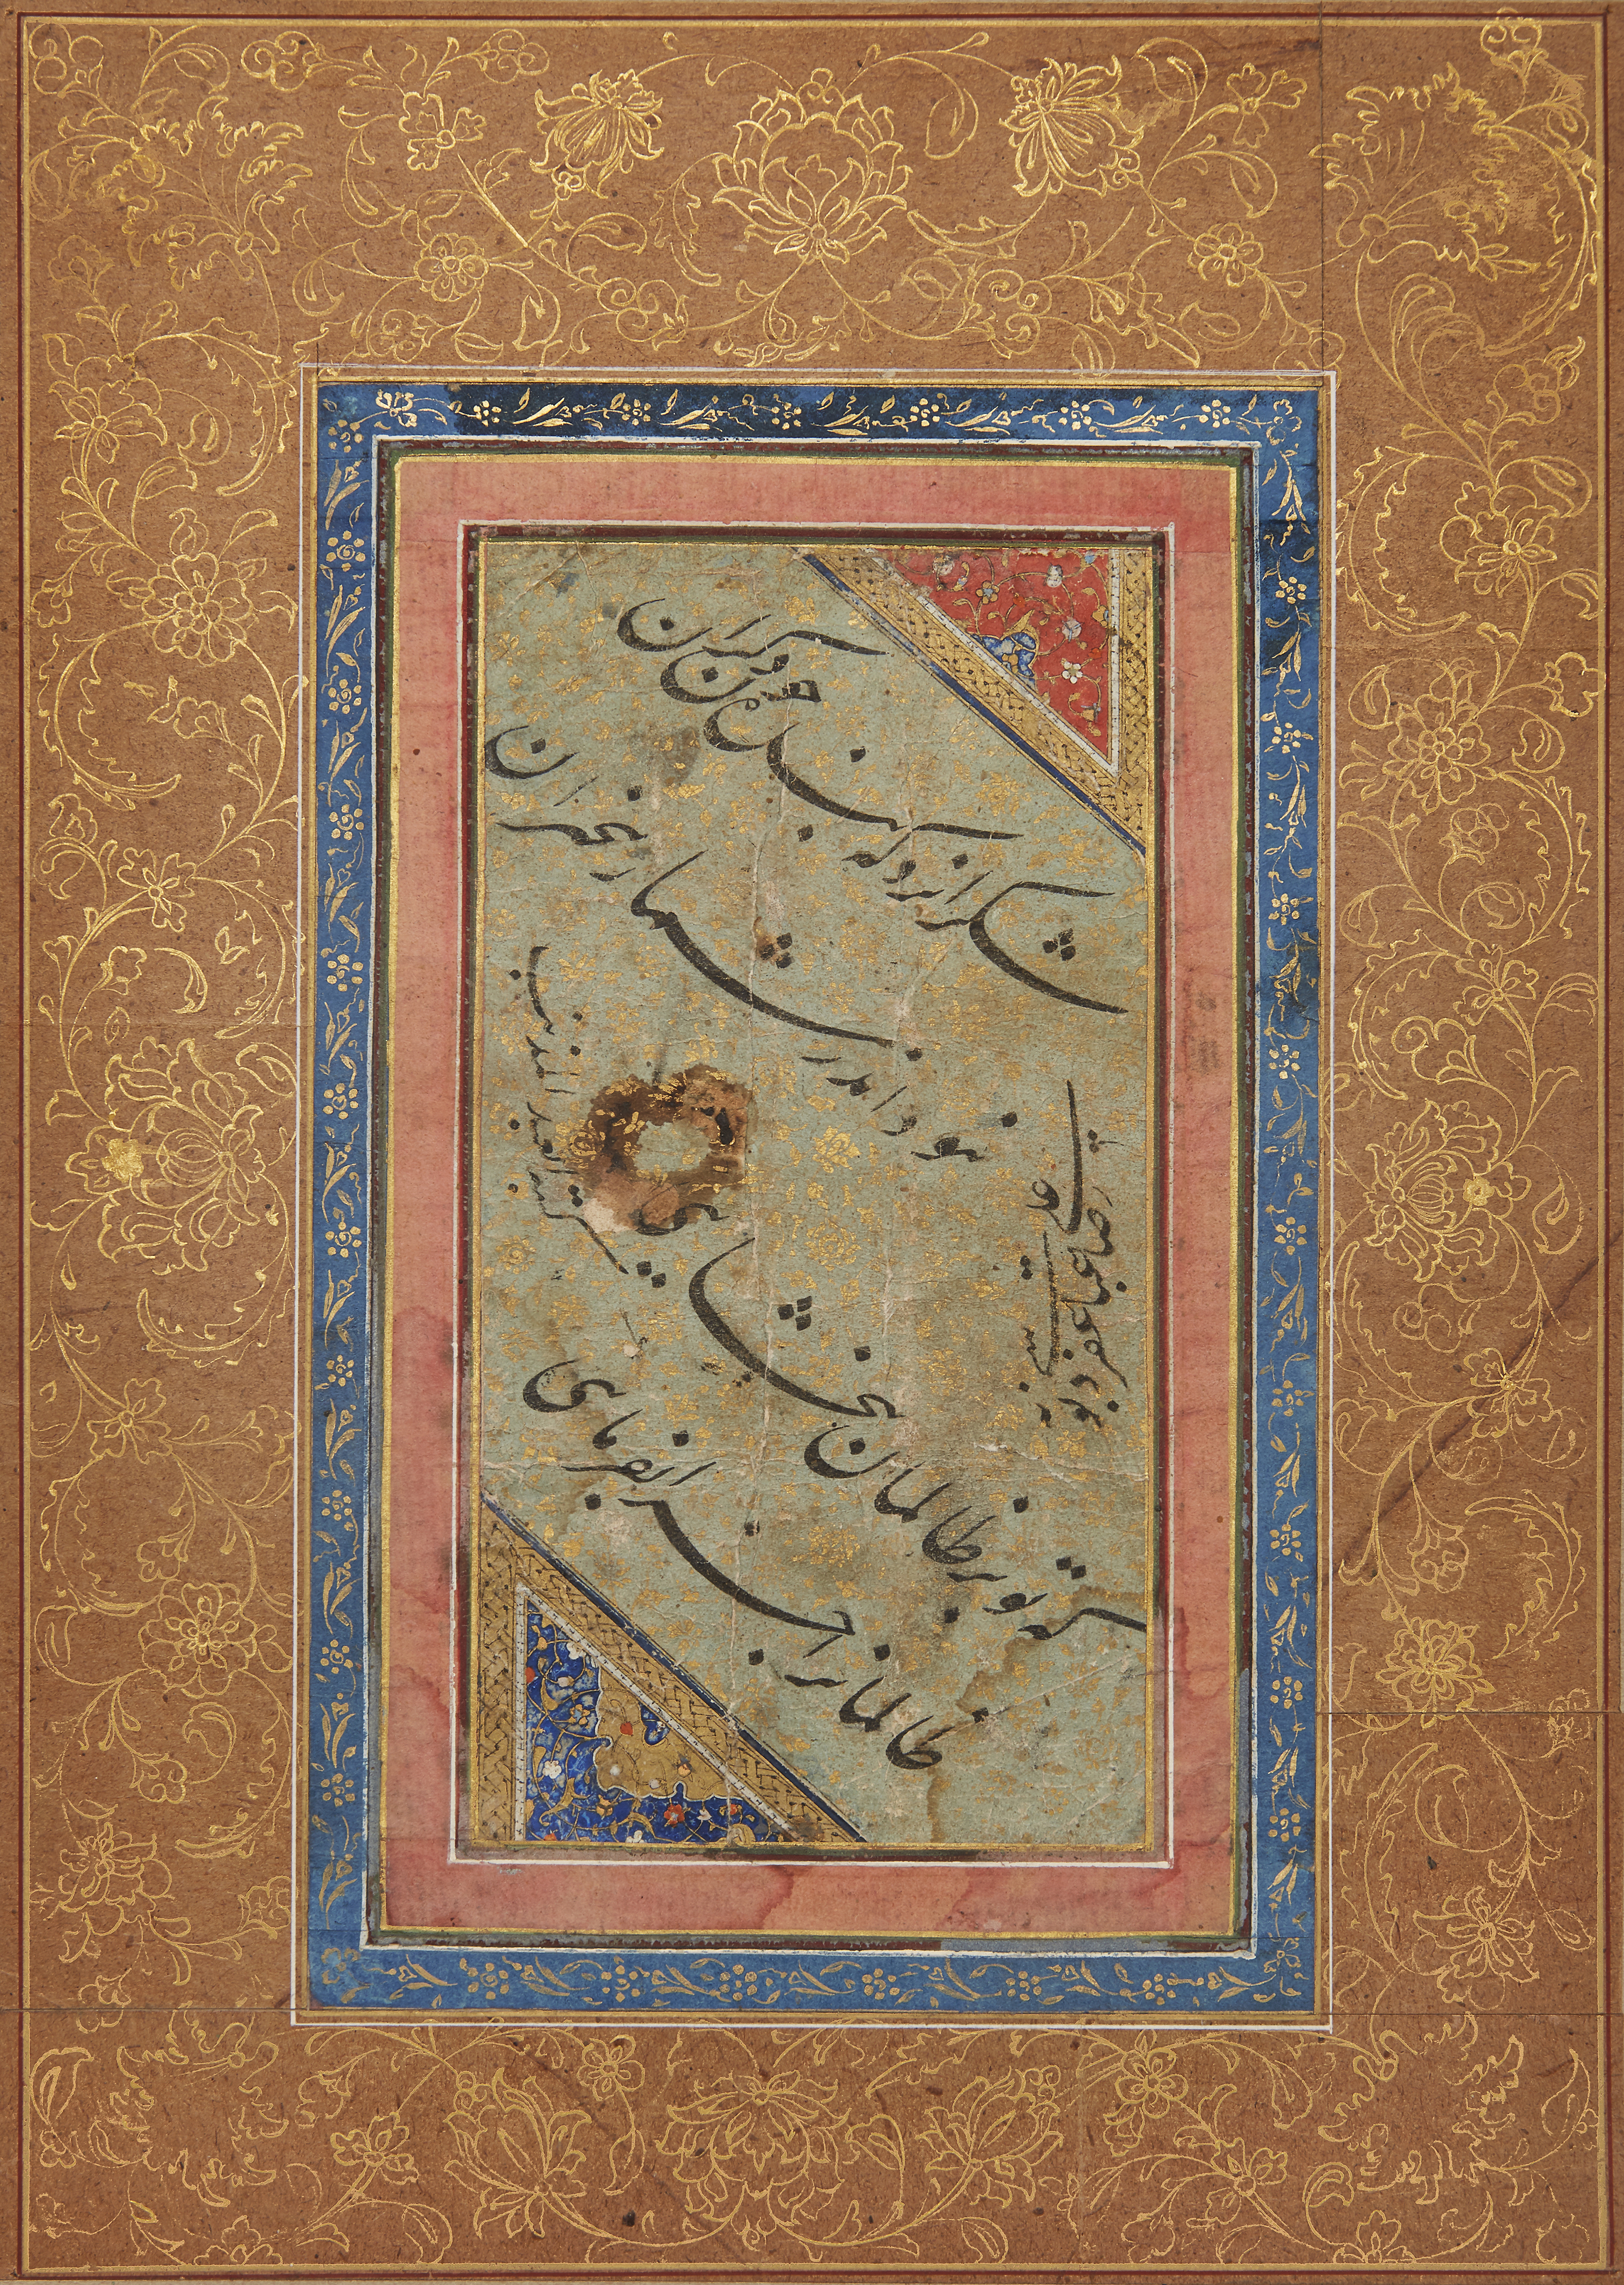 Property from An Important Private Collection Six calligraphic panels, Qajar Iran, 19th century... - Image 3 of 6